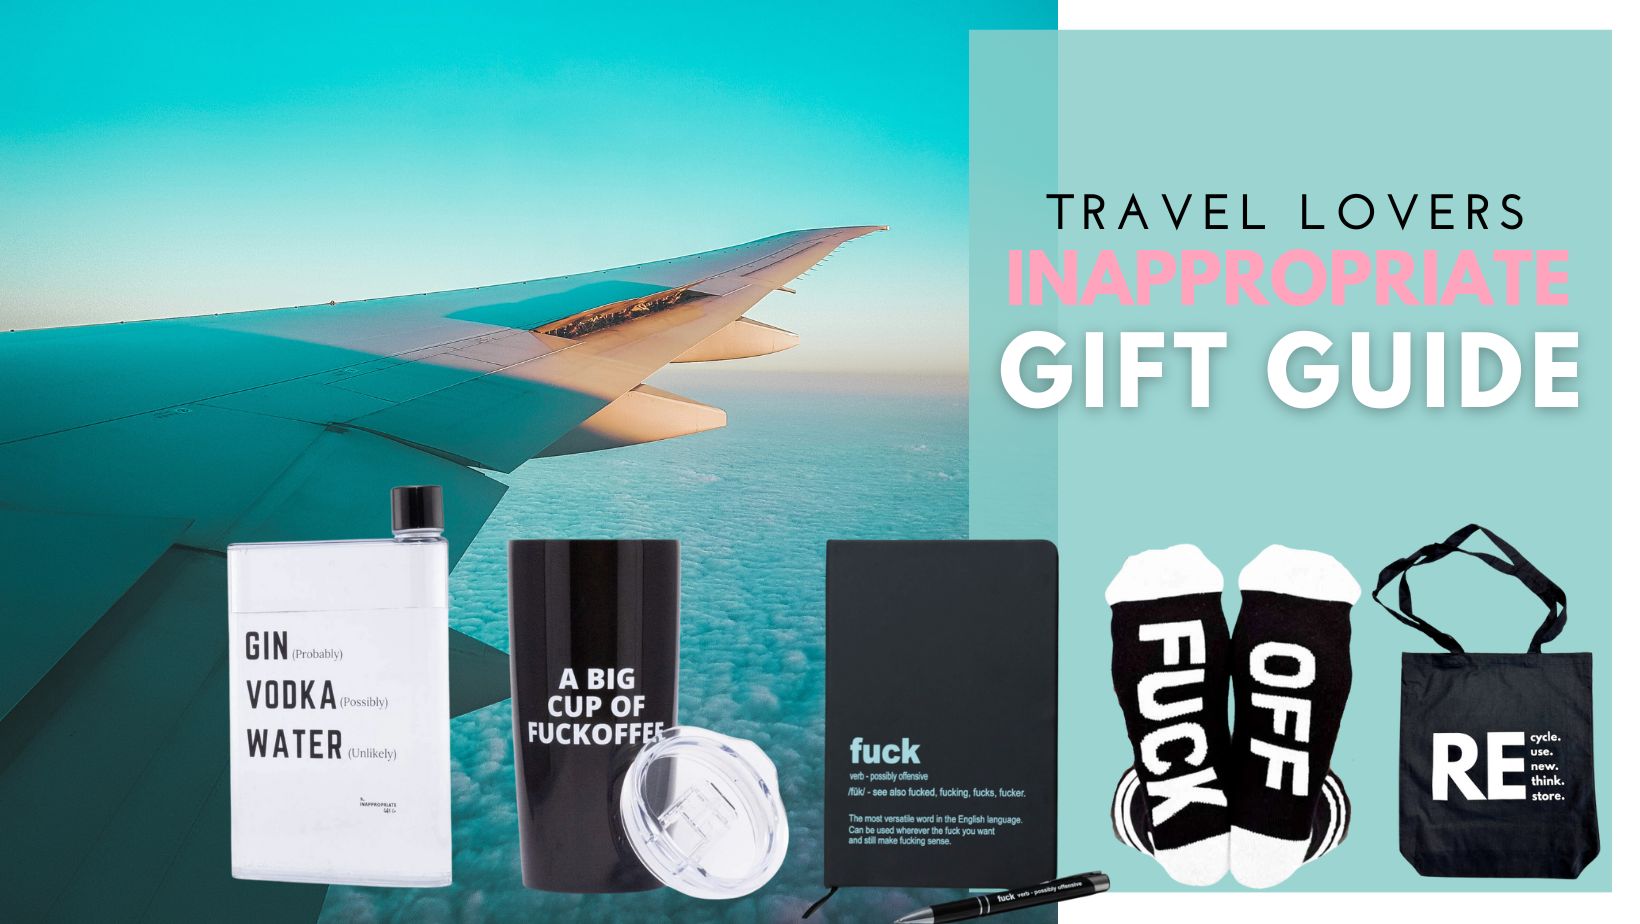 Travel Lovers' Gift Guide - Unique & Funny Wanderlust Presents